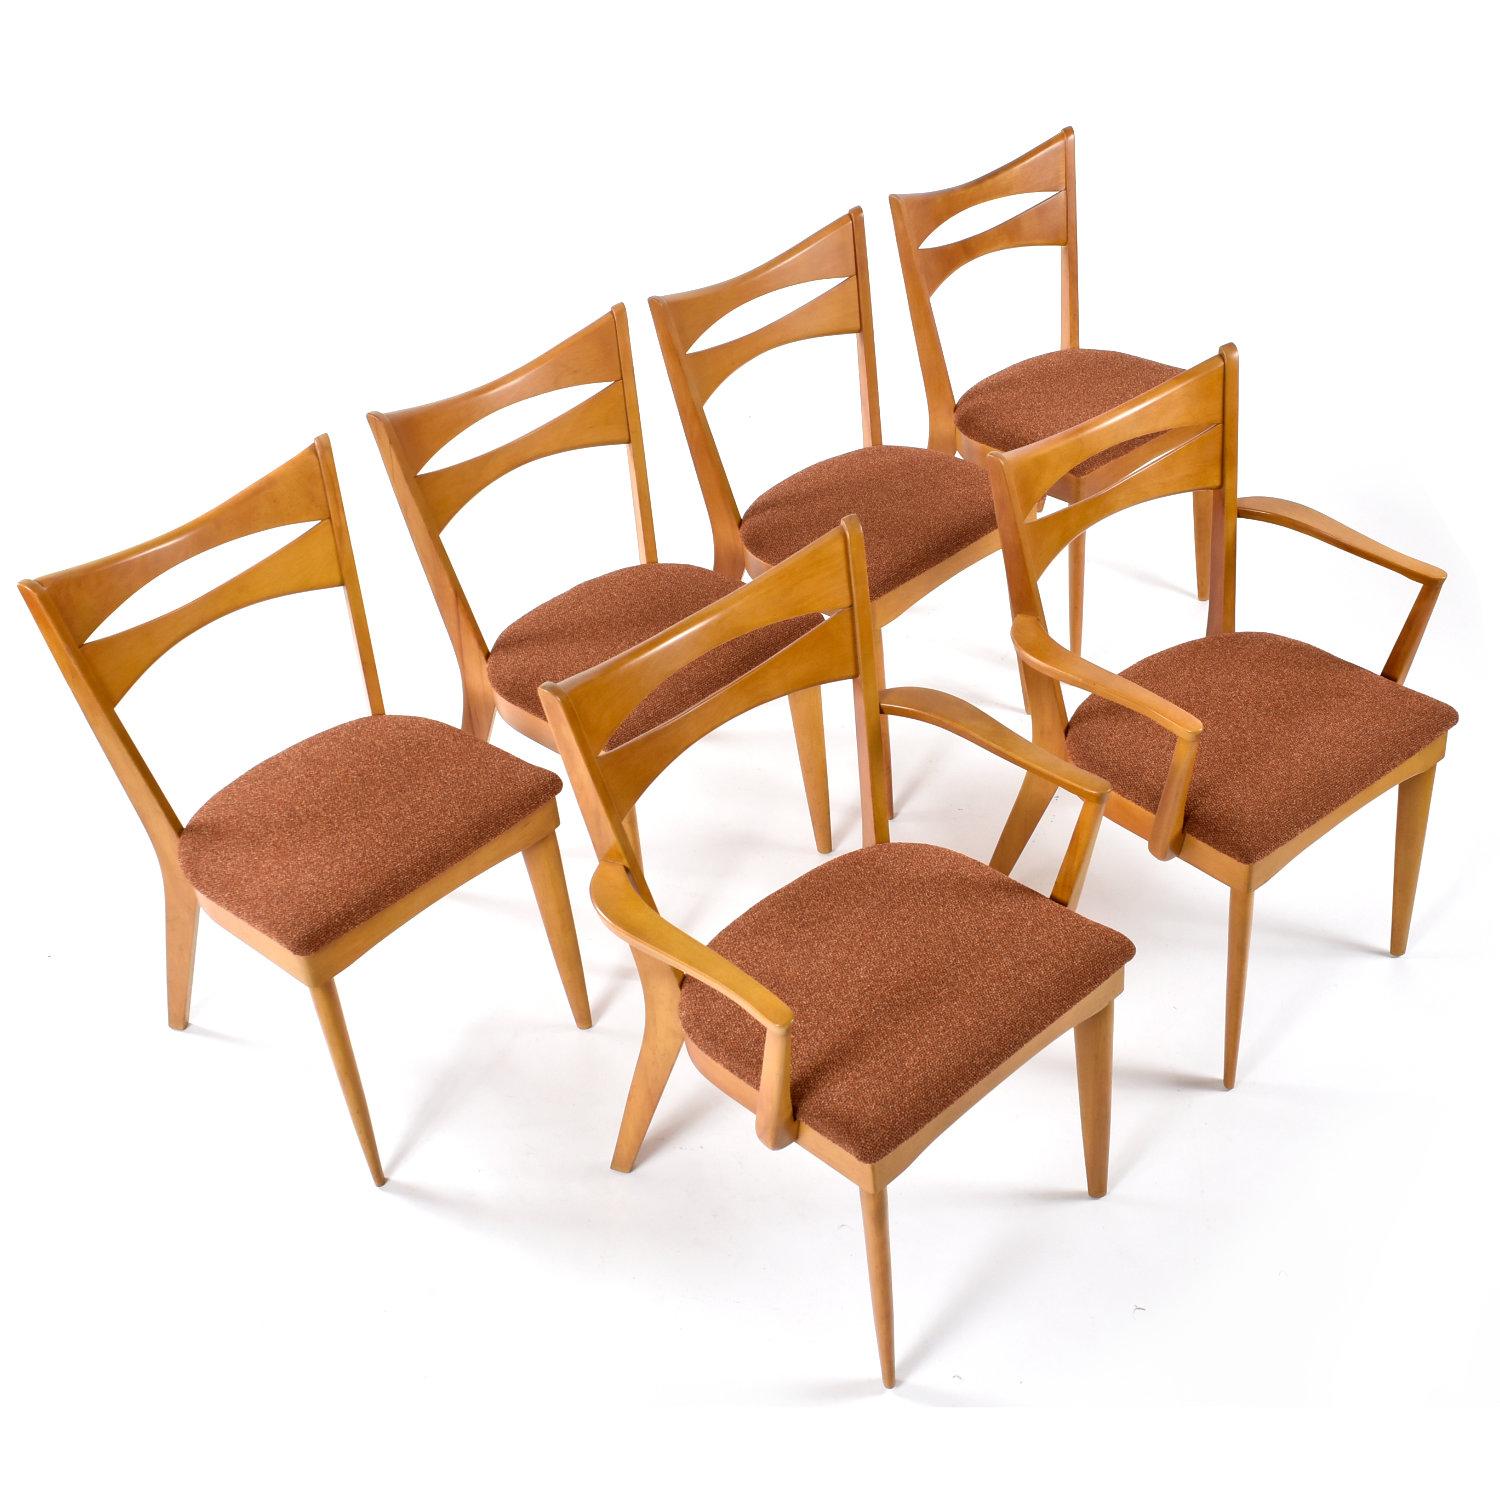 Set of six restored Mid-Century Modern Heywood Wakefield M1553A dining chairs. The “Cat’s eye” dining chairs feature a distinctive inverted double-bow back rest. This arched motif resembles the shape of a cat’s eye, hence the nickname. Our chairs